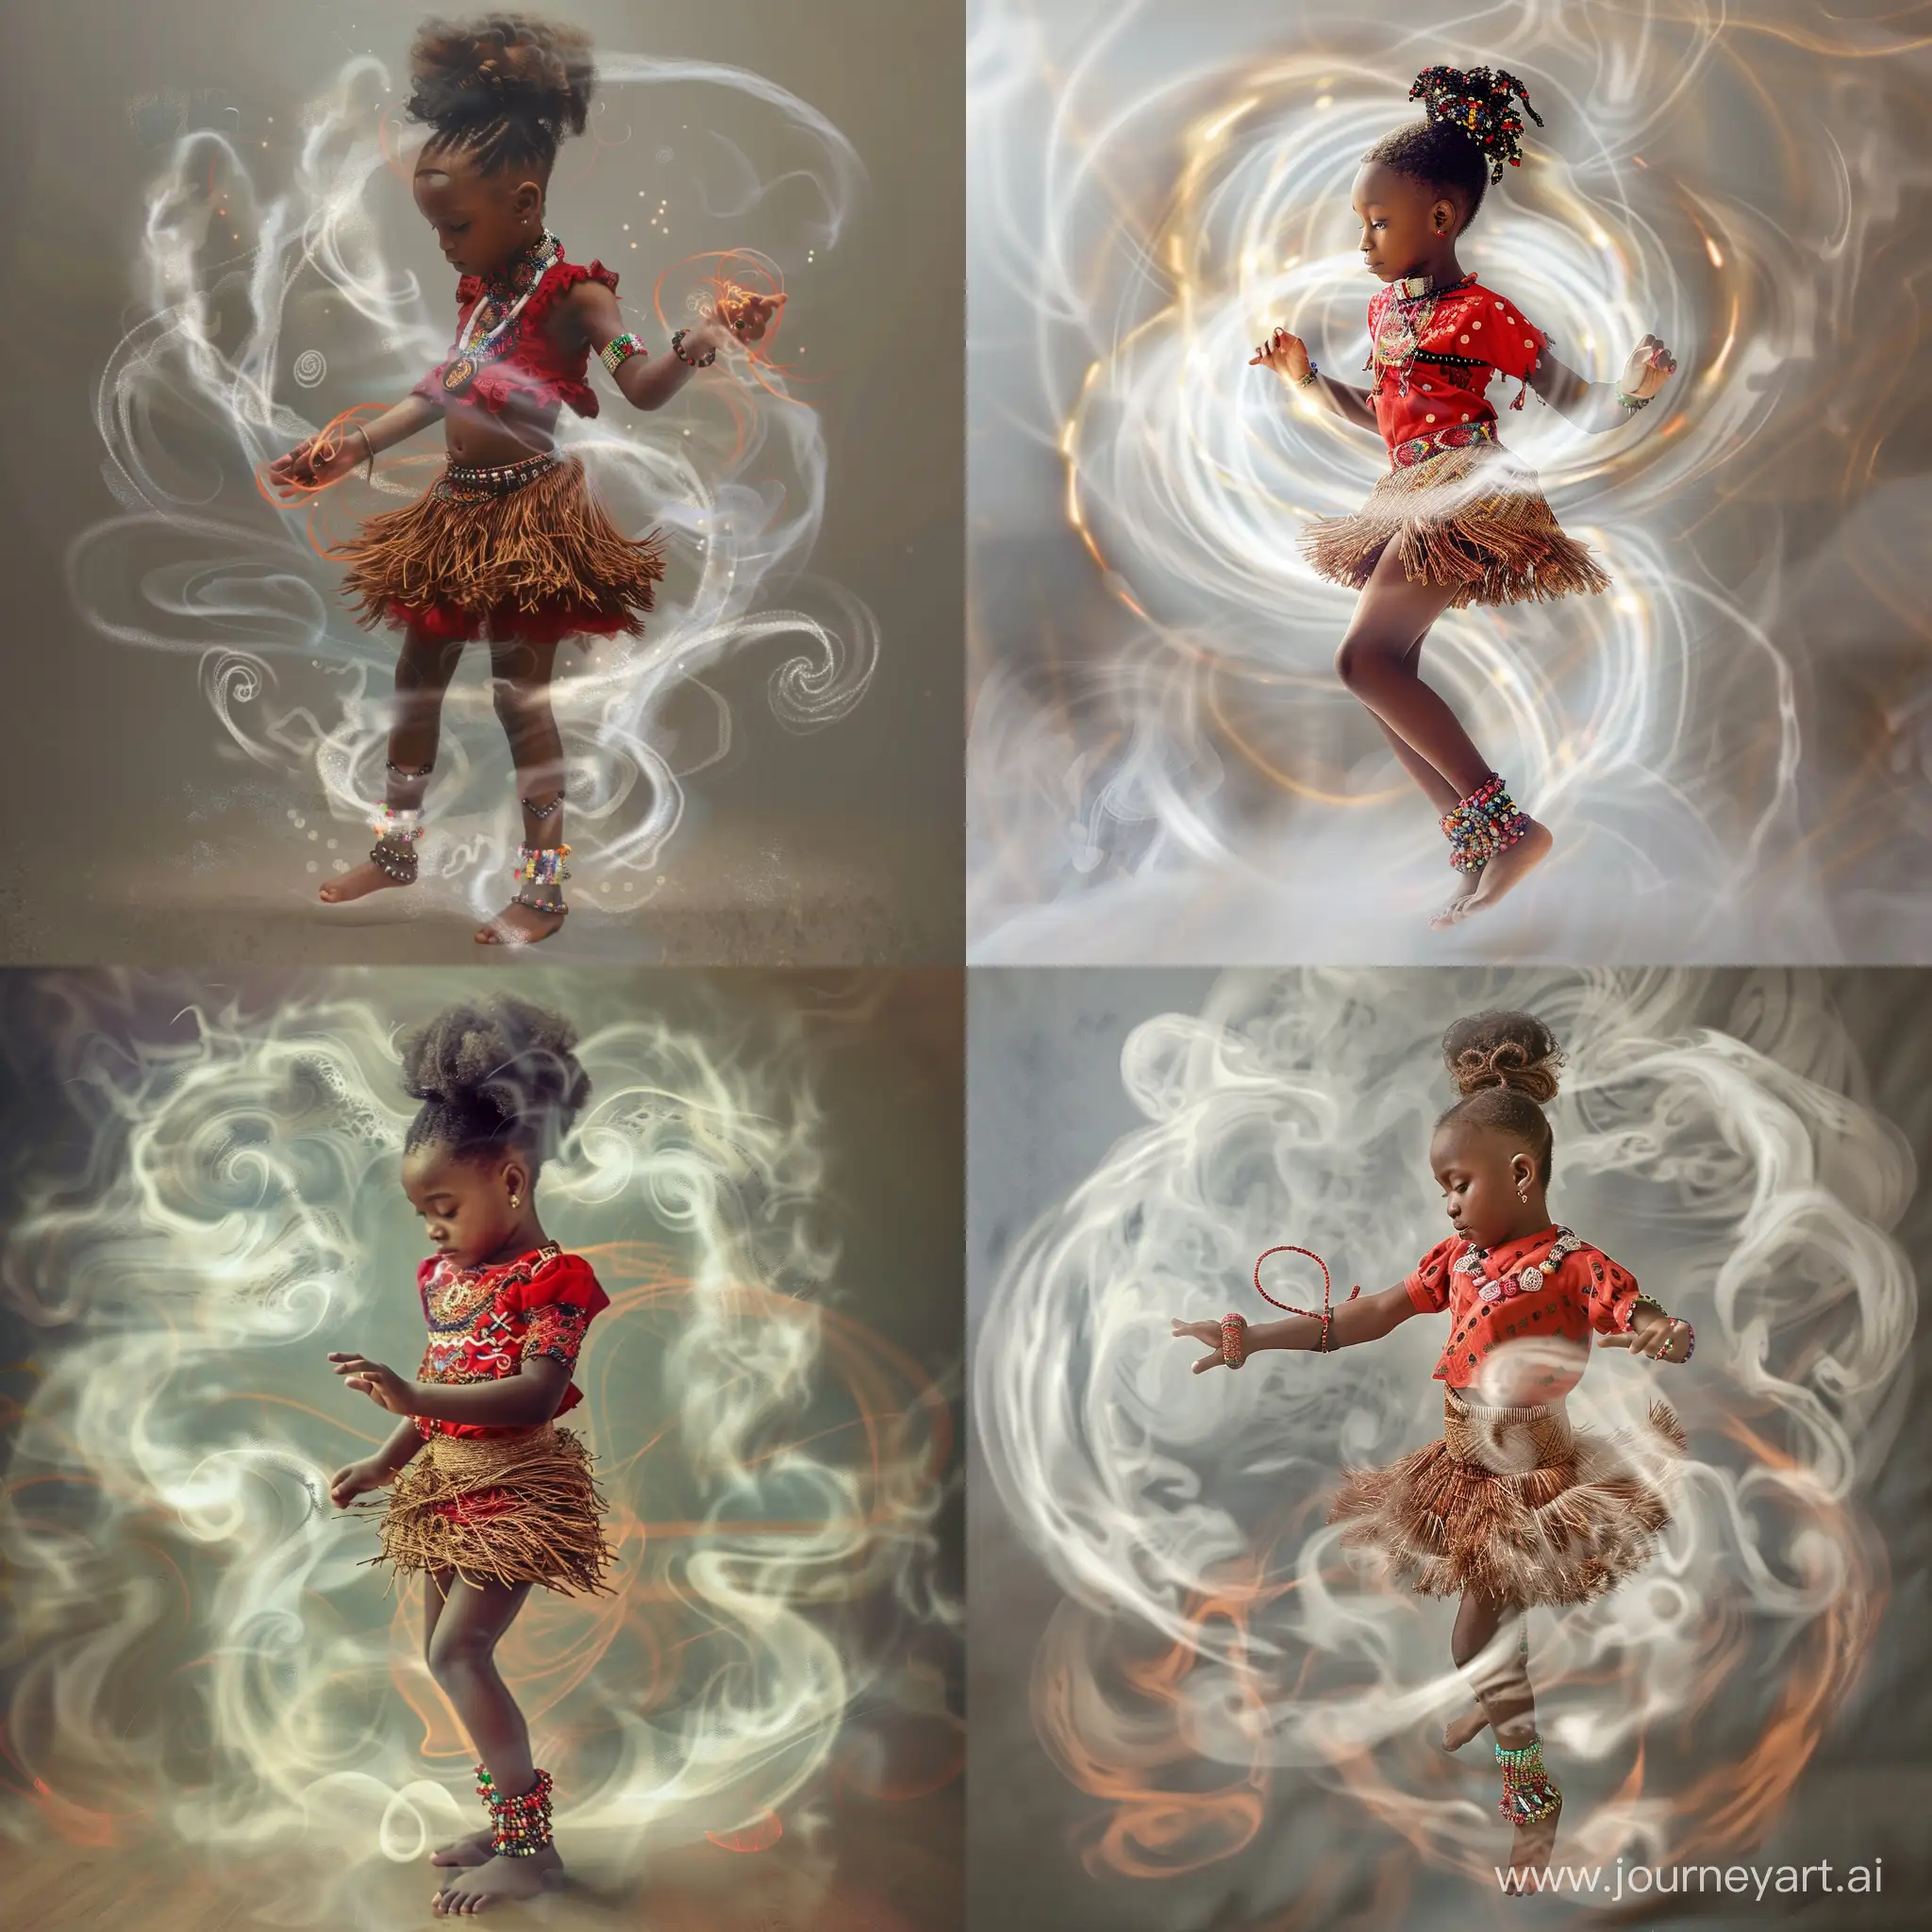 Create an image of a young Igbo girl of about 7 years in traditional dancing pose. She is wearing woven raffia palm short skirt for traditional dancing and her blouse is also short. Both are red in colour. Her hair is packed with in a high bun and held with multicoloured beads. She has beads around her ankles and her waist. She dances energetically with swirls of white mist around her, throwing off an aura of mysticism and surrealism around her.